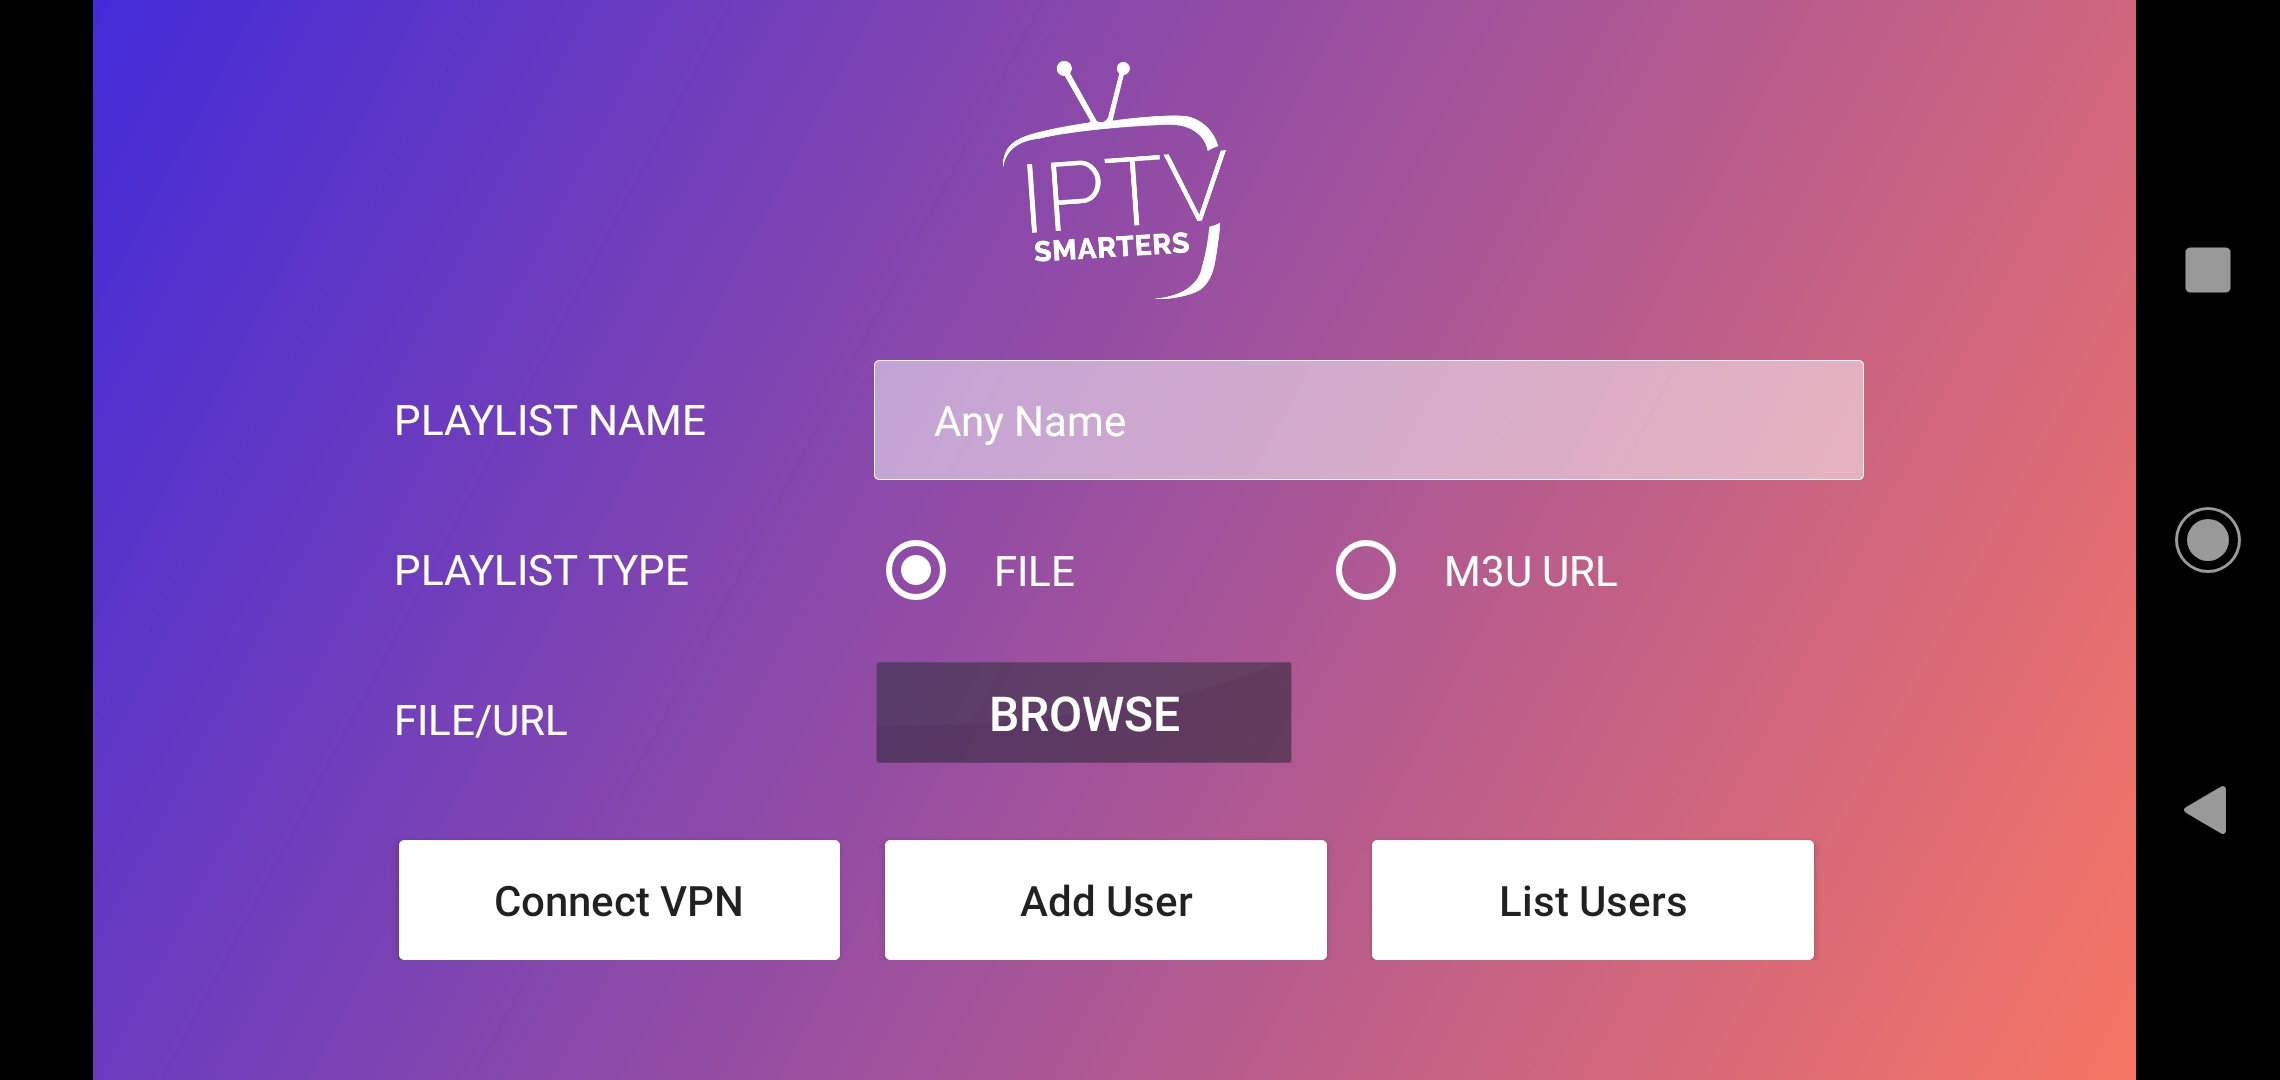 IPTV Smarters Pro 3.0.9.4 Download for Android Free